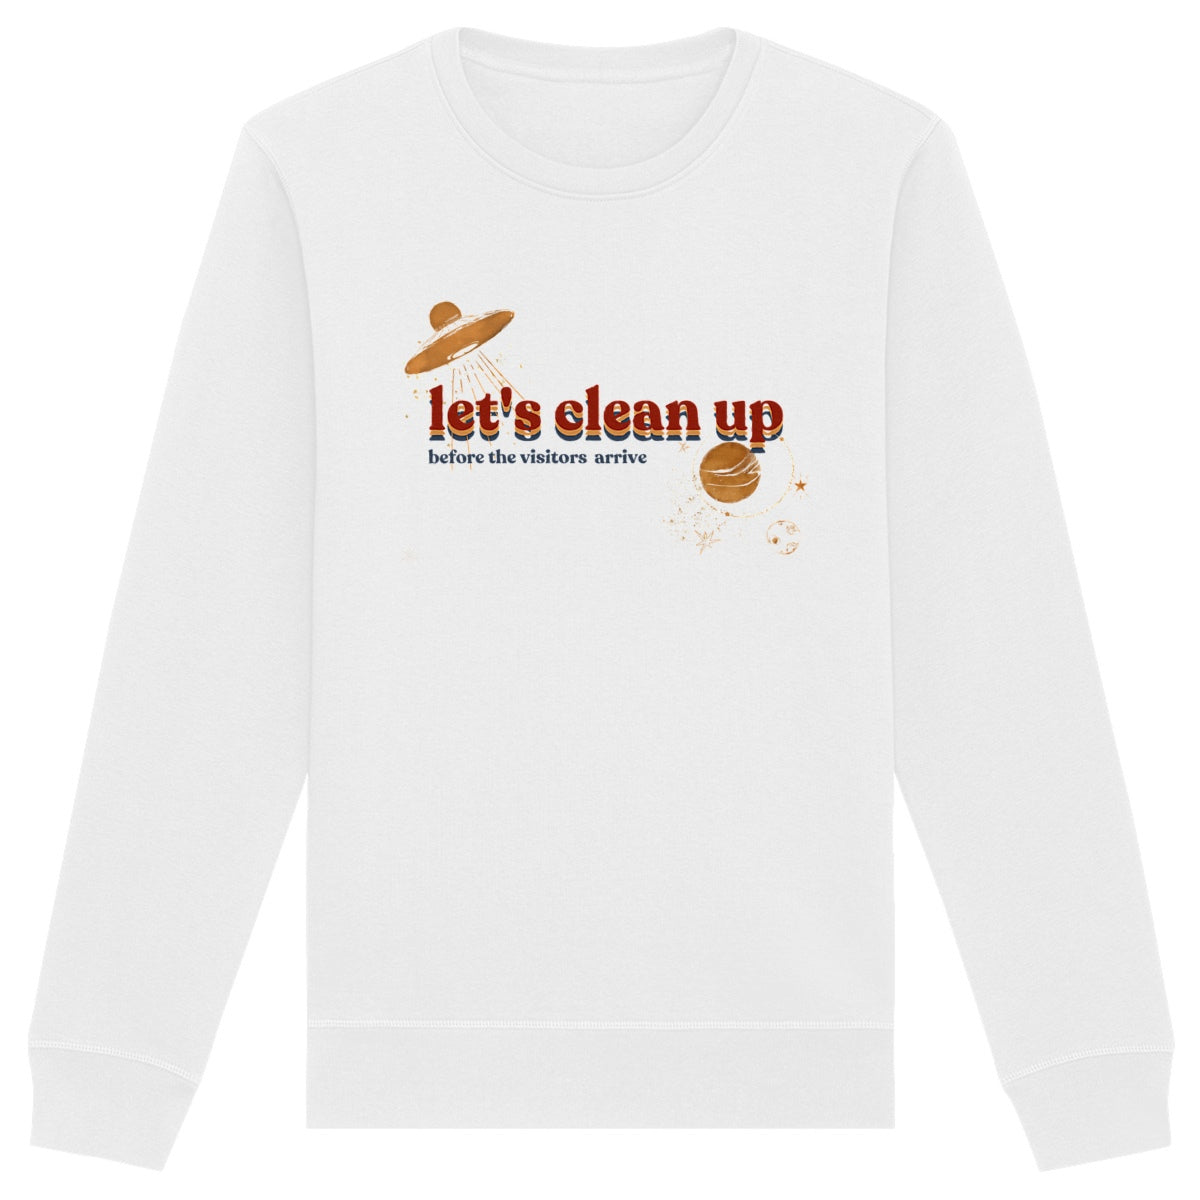 Let's Clean Up Red, Lets clean up, Tees Organic cotton clothes for women, Organic Cotton Clothing for Women, Organic Cotton Tank Tops, Cotton Organic T Shirts, Organic Cotton T Shirt, Band Tees, Vintage Tees, Rolling Stones Bomber Jacket, Stoned Girls, She's a rainbow, Environmental Slogan Tshirt, Sustainable Fashion Ideas, Sustainable Fashion Dresses, What is sustainability in fashion, Teen sustainable fashion and ethical brands, Sustainable Fashion Course, made to order clothing, made to order shirts,